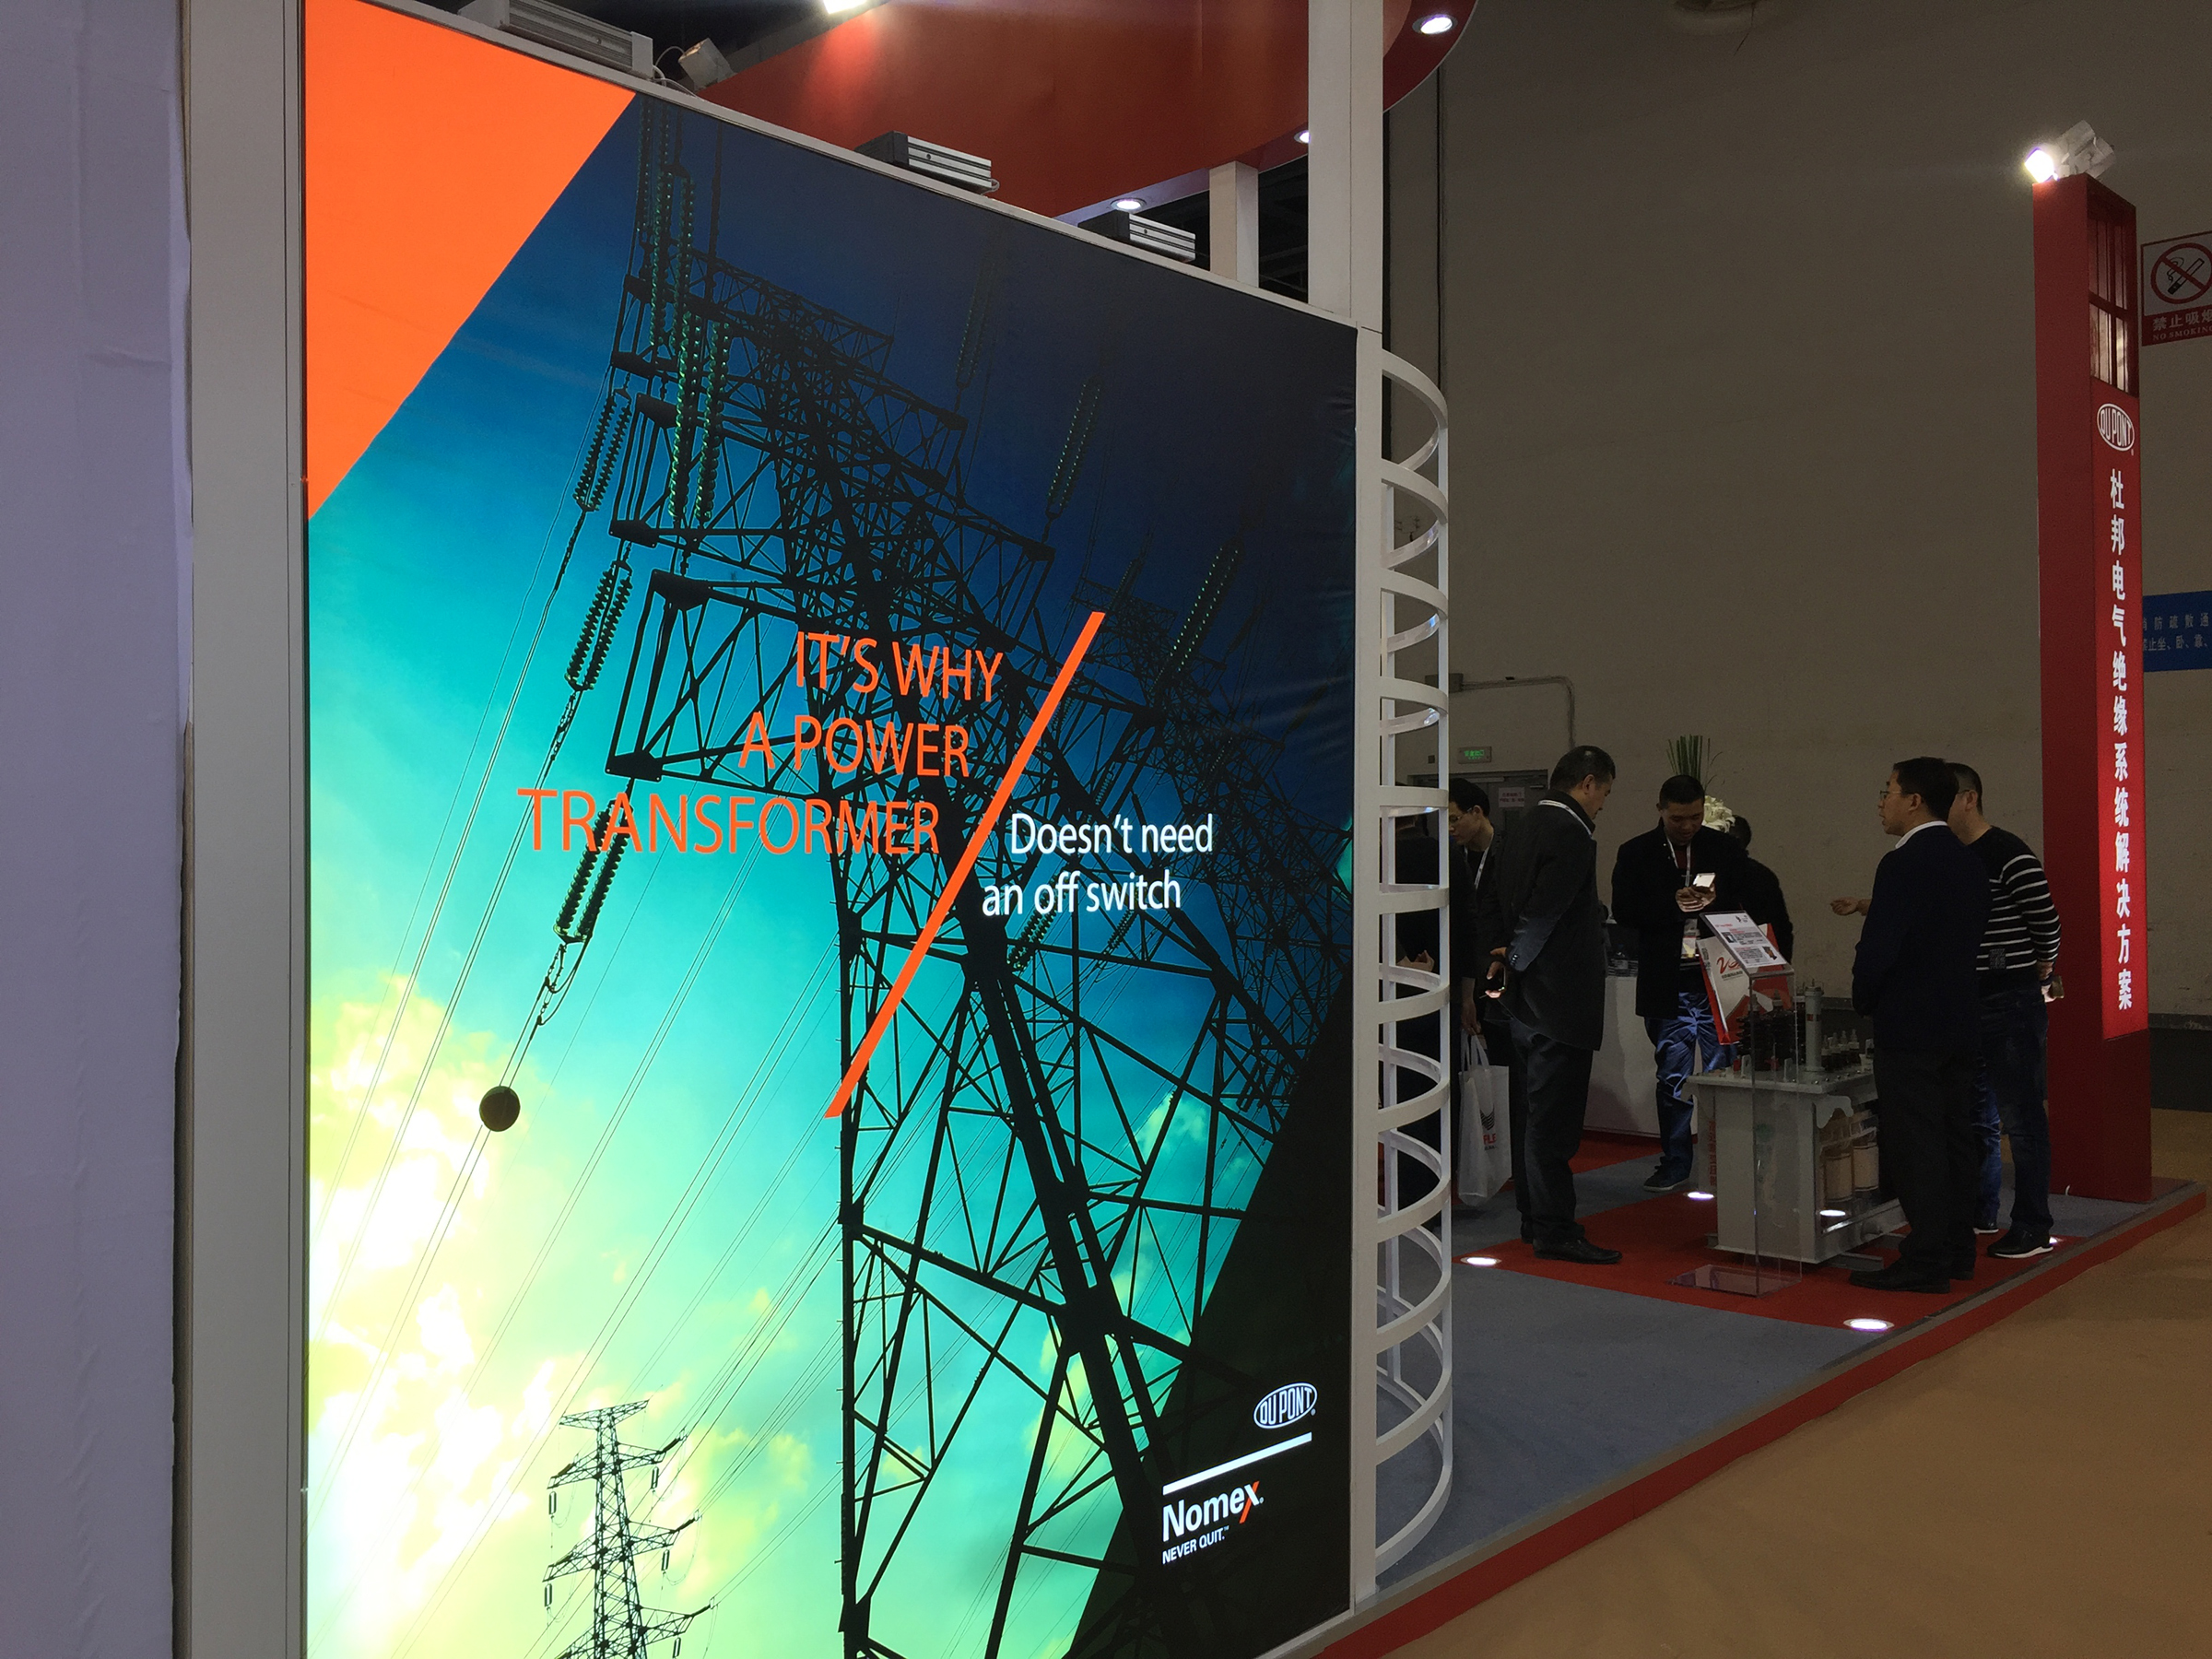 DuPont Protection Solutions at the CWIEME (Coil Winding, Insulation & Electrical Manufacturing Exhibition) Shanghai in China